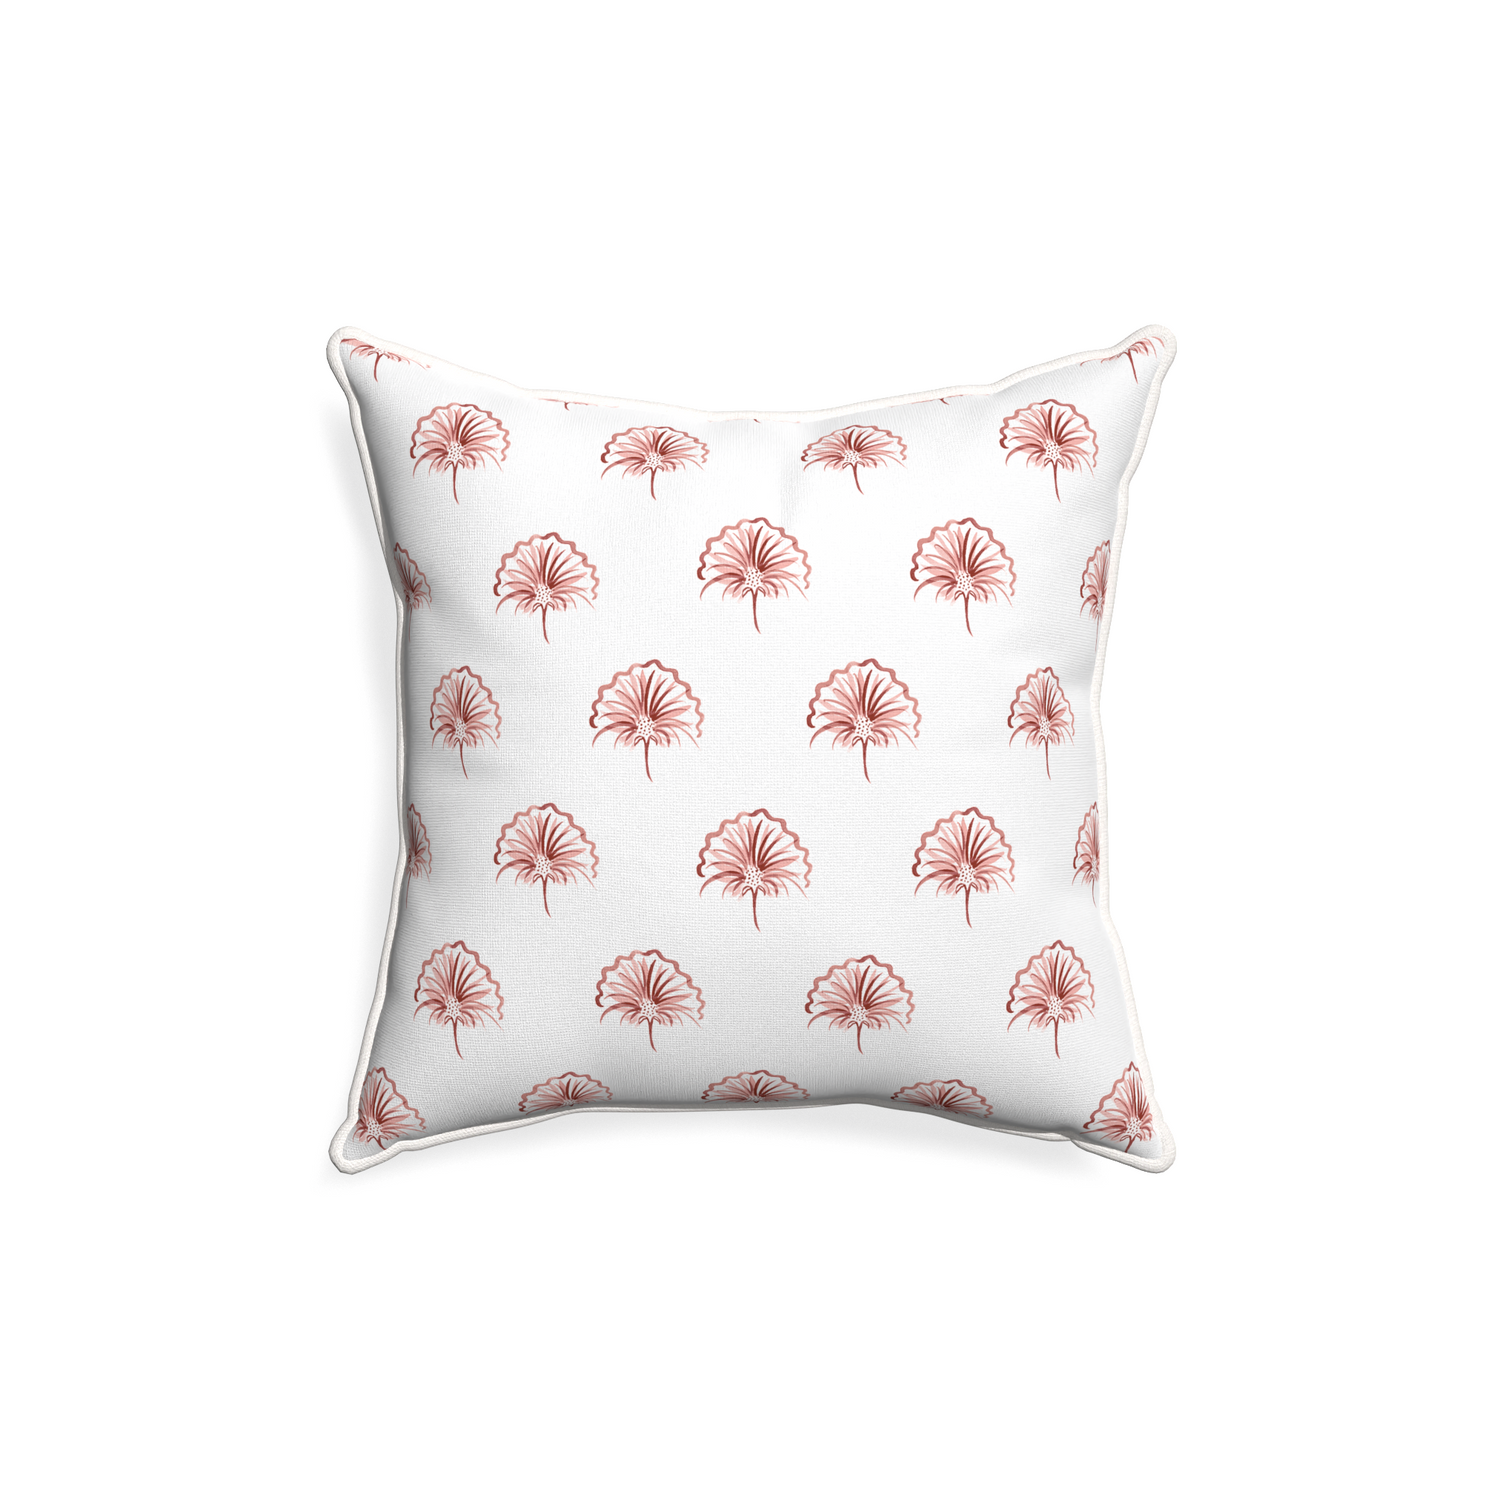 18-square penelope rose custom pillow with snow piping on white background